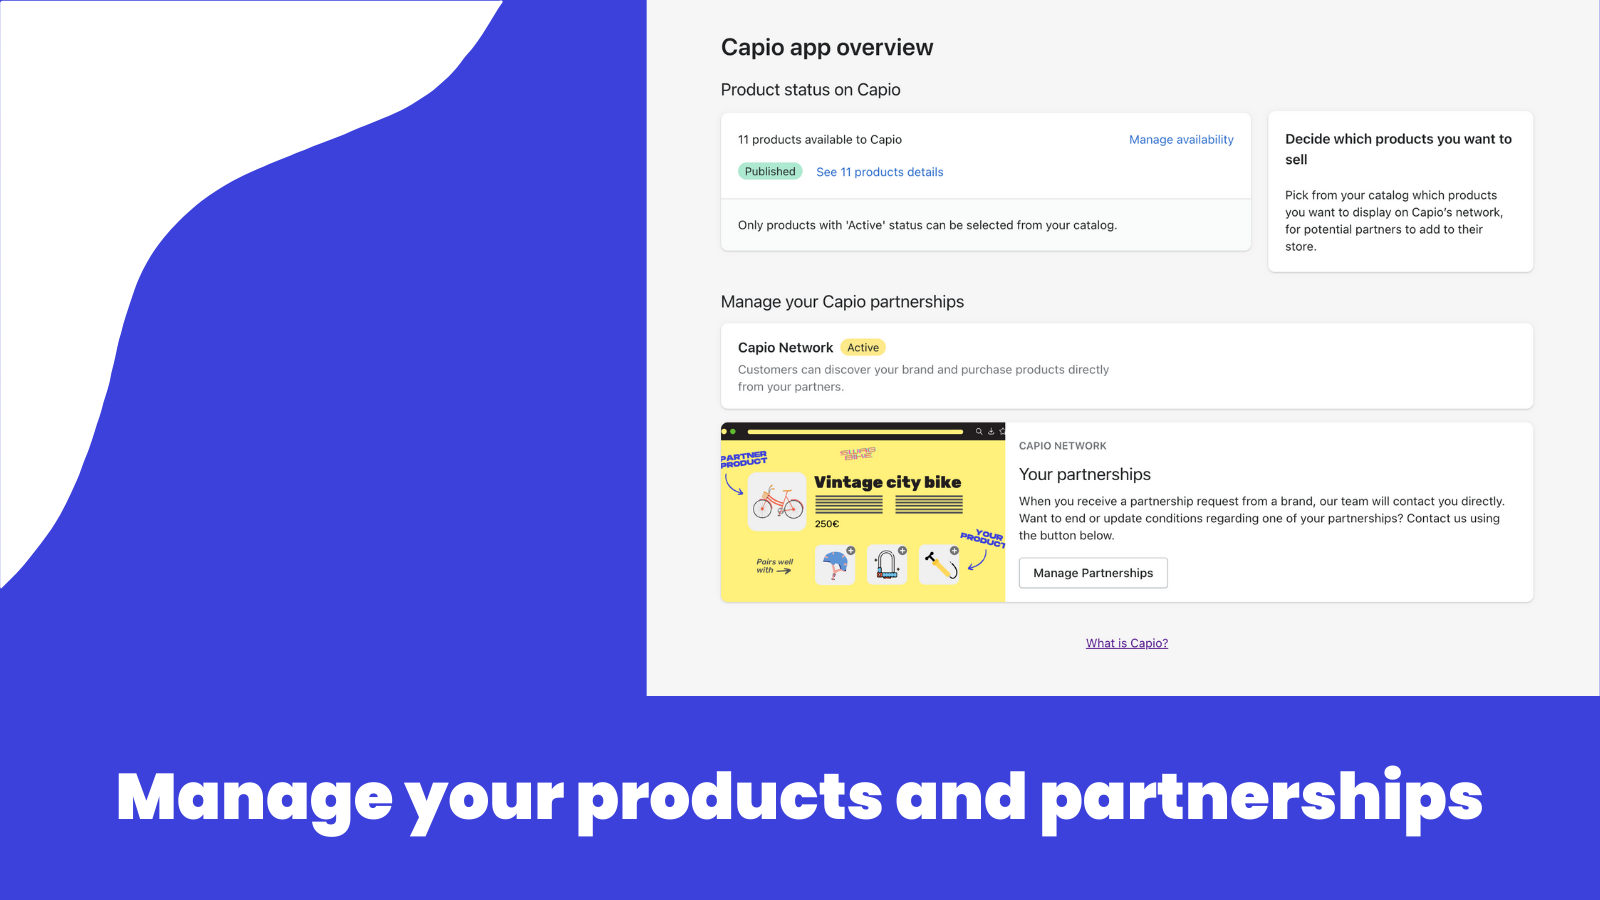 Manage your products and partnerships